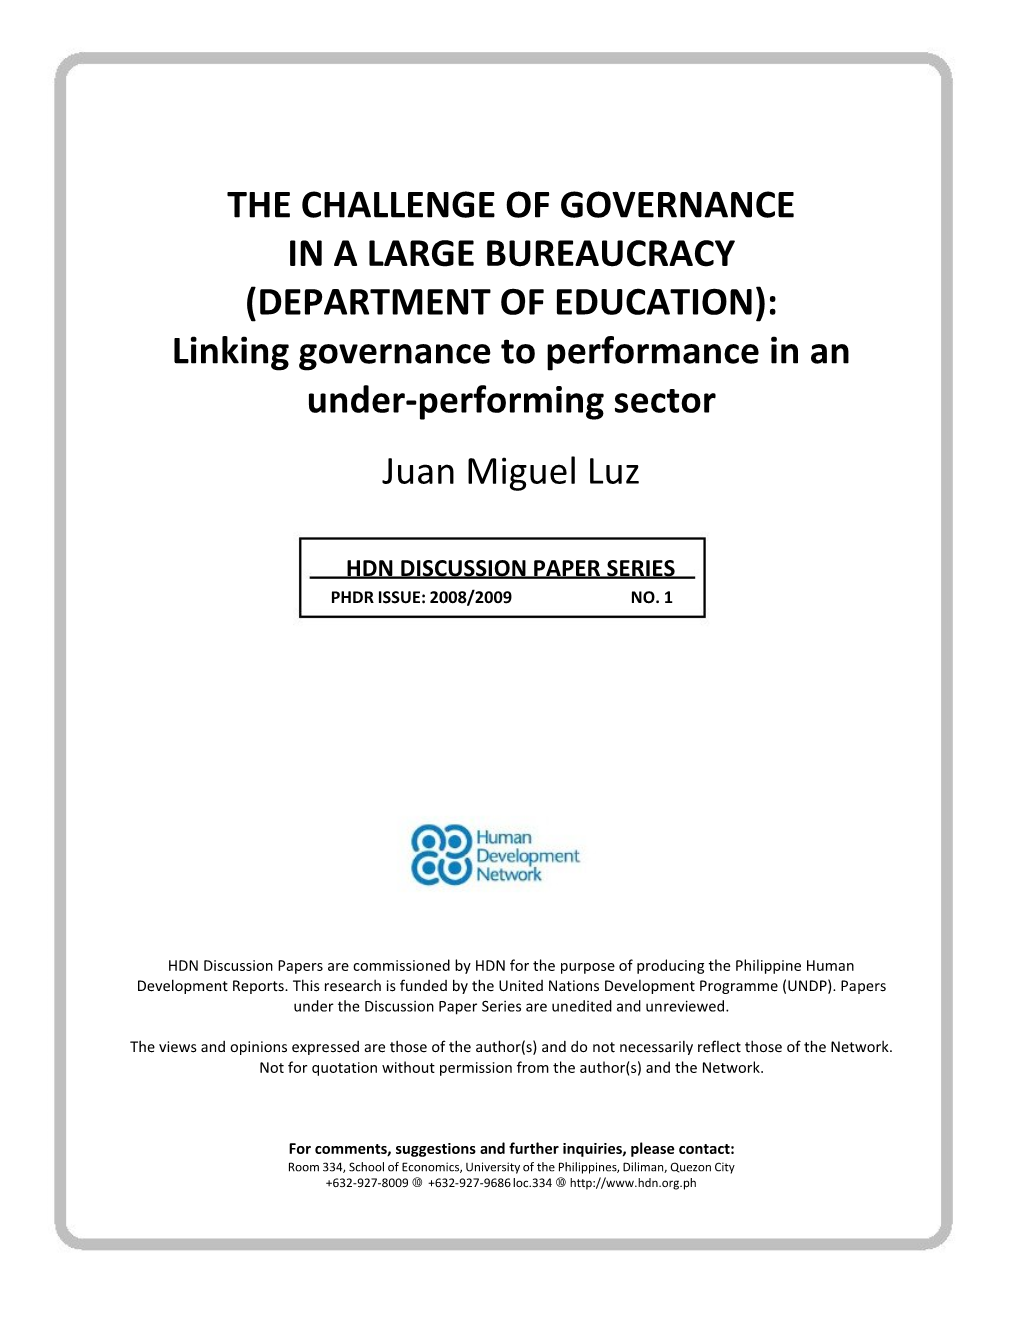 THE CHALLENGE of GOVERNANCE in a LARGE BUREAUCRACY (DEPARTMENT of EDUCATION): Linking Governance to Performance in an Under‐Performing Sector Juan Miguel Luz